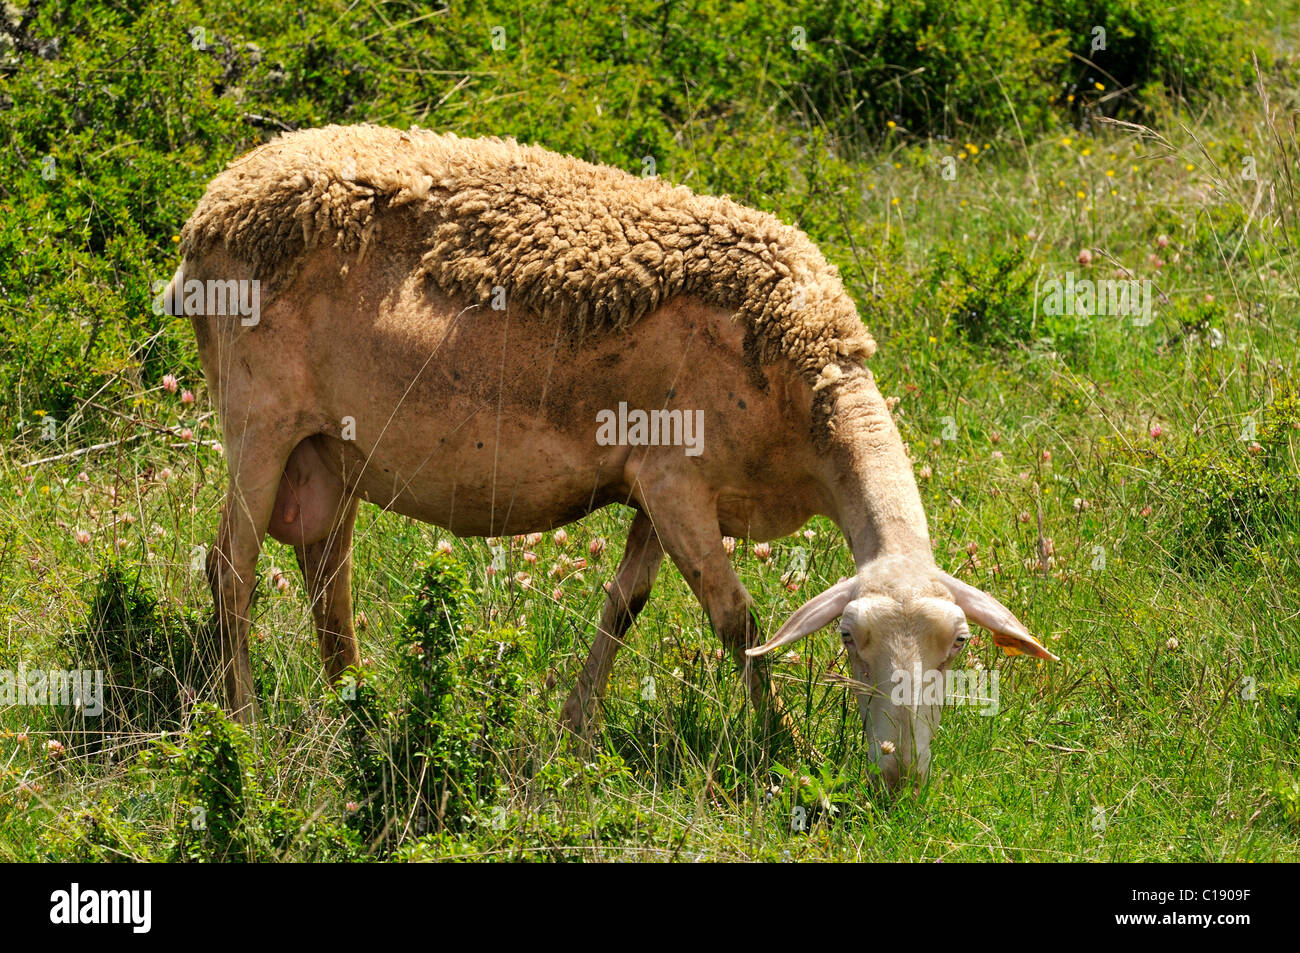 Lacaune dairy sheep with the race-typical coat on the Causse Méjean plateau, Roquefort region, France, Europe Stock Photo